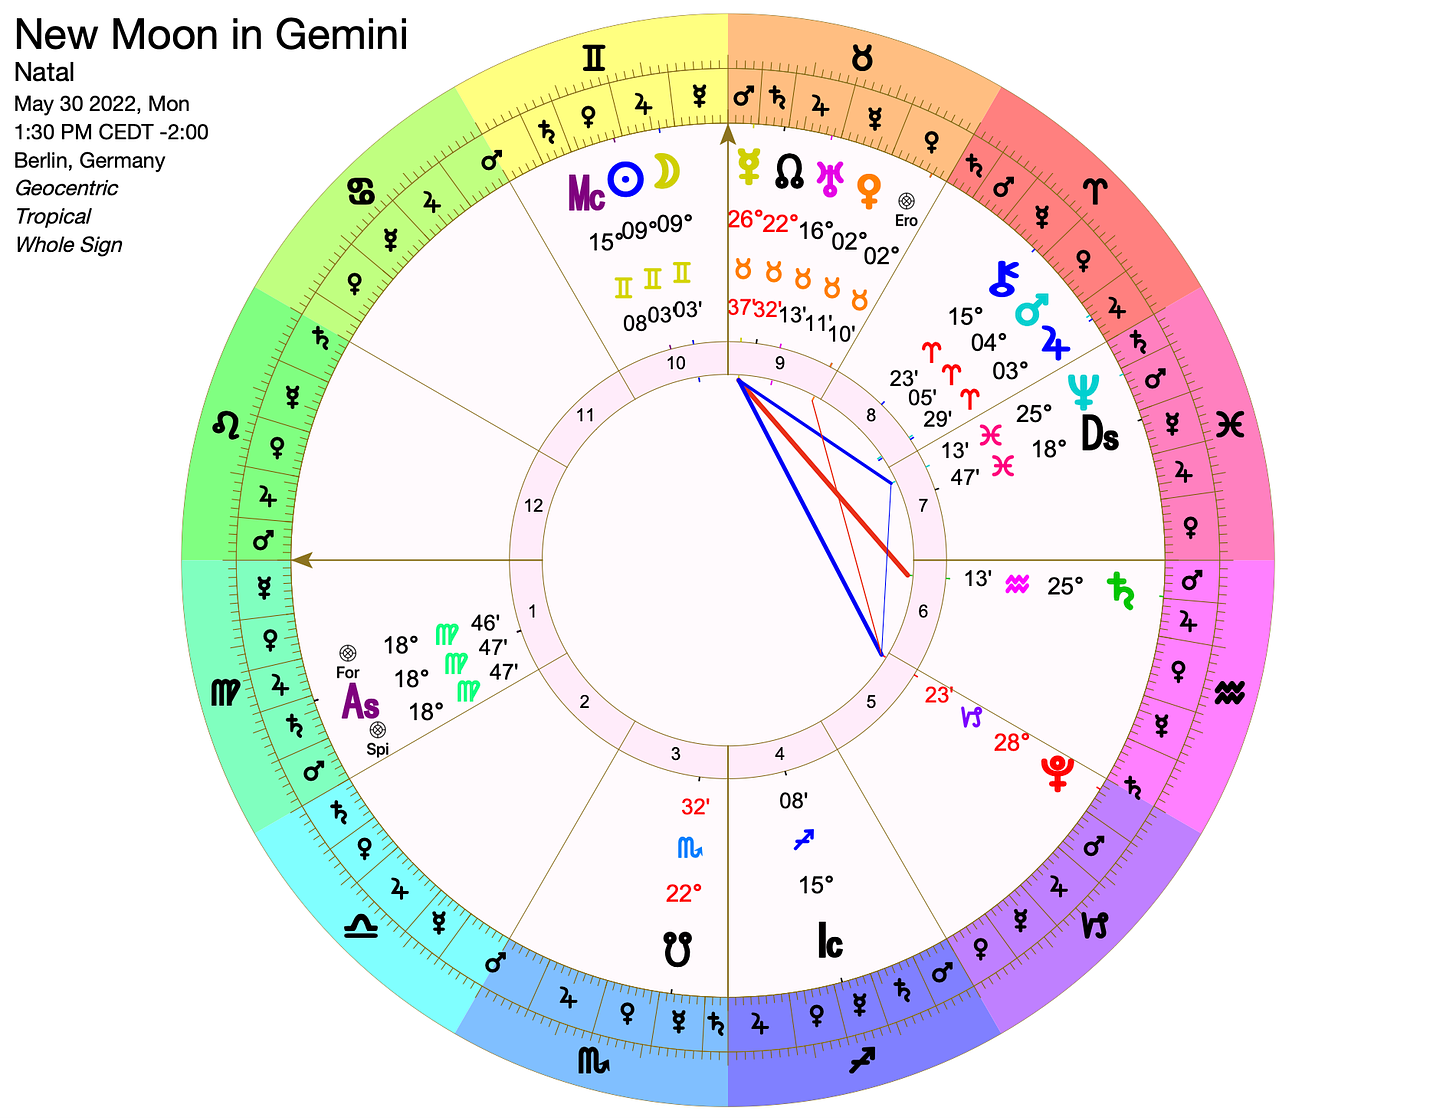 chart for the new moon in Gemini, May 30, 200 at 1:30 PM CEDT Berlin, Germany.